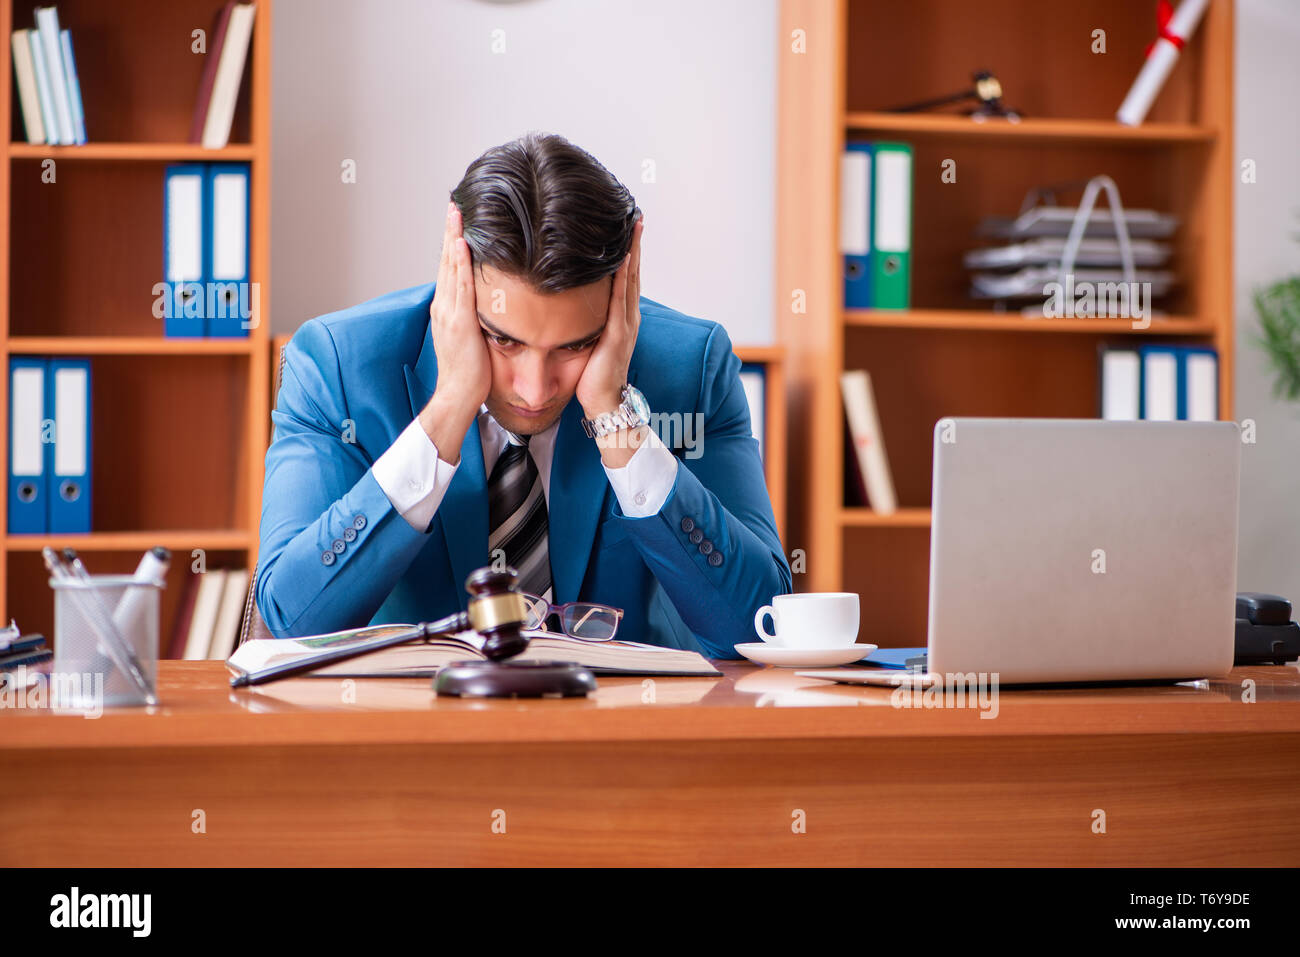 Lawyer working in the office Stock Photo